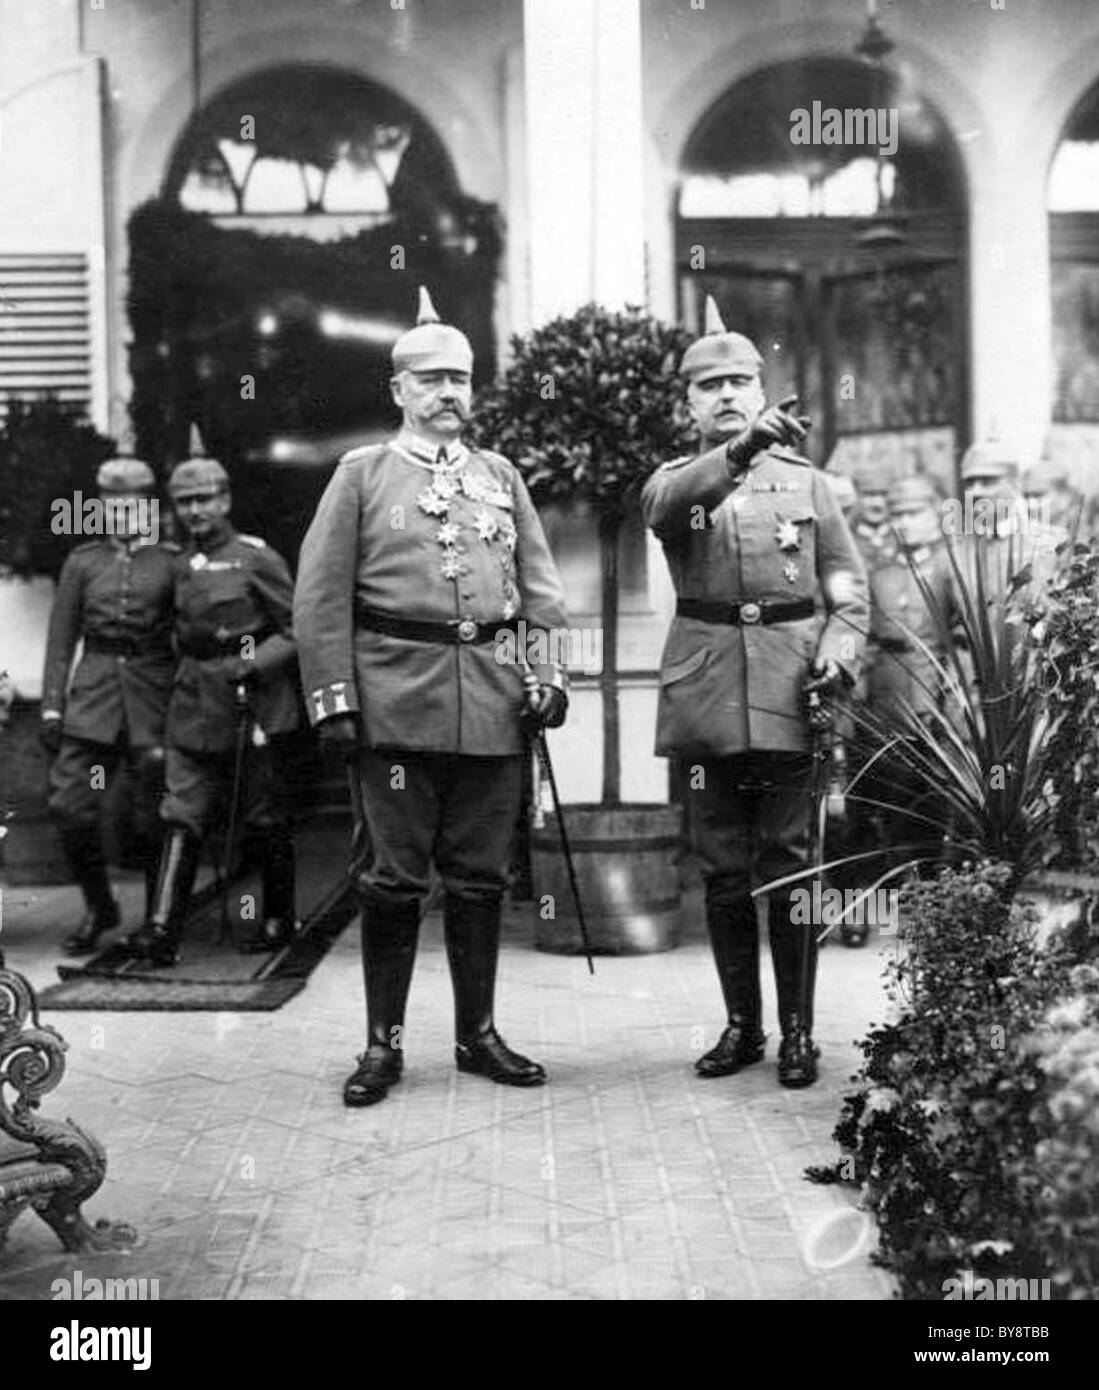 PAUL von HINDENBURG (left) with fellow WWI German General Erich Ludendorff at the German Army HQ in Bad Kreuznach about 1915 Stock Photo